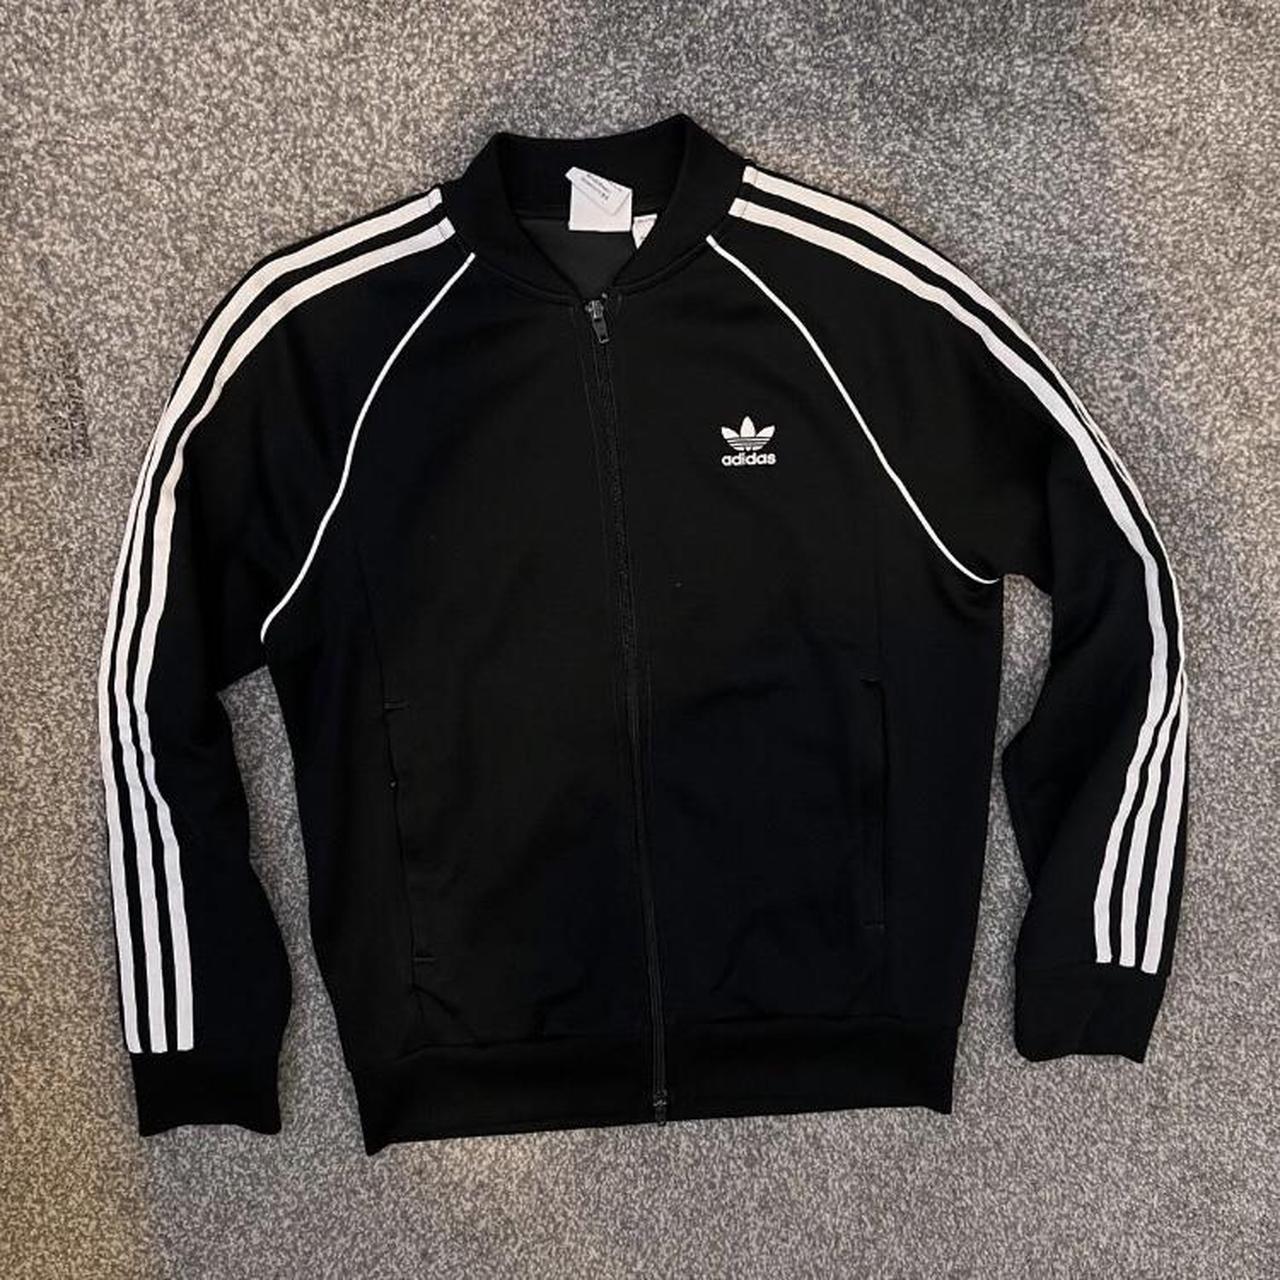 Adidas SST top, washed and in brand new condition. - Depop